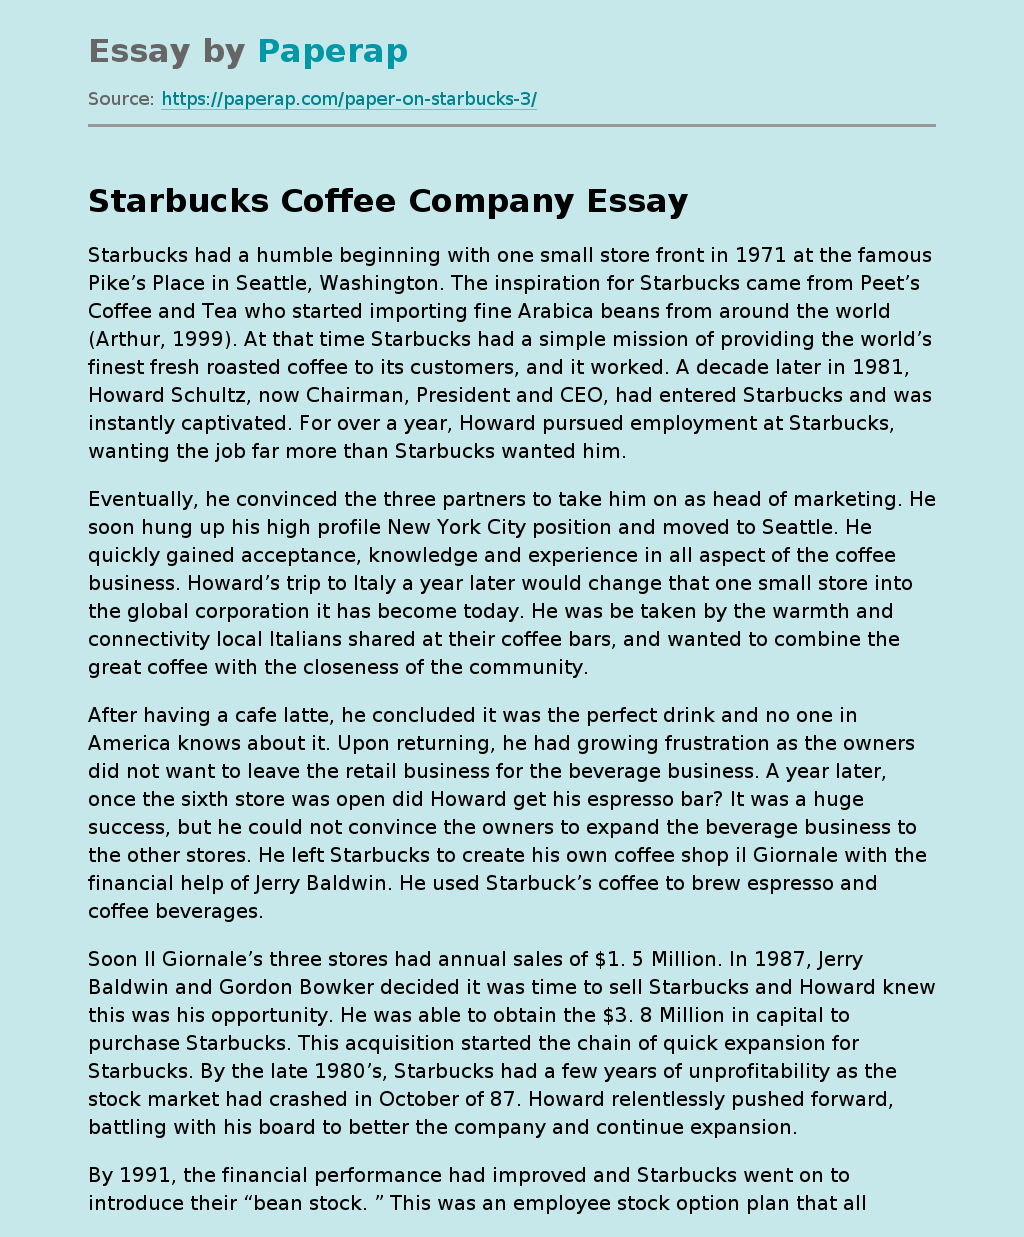 The History of the Development of the Starbucks Coffee Company